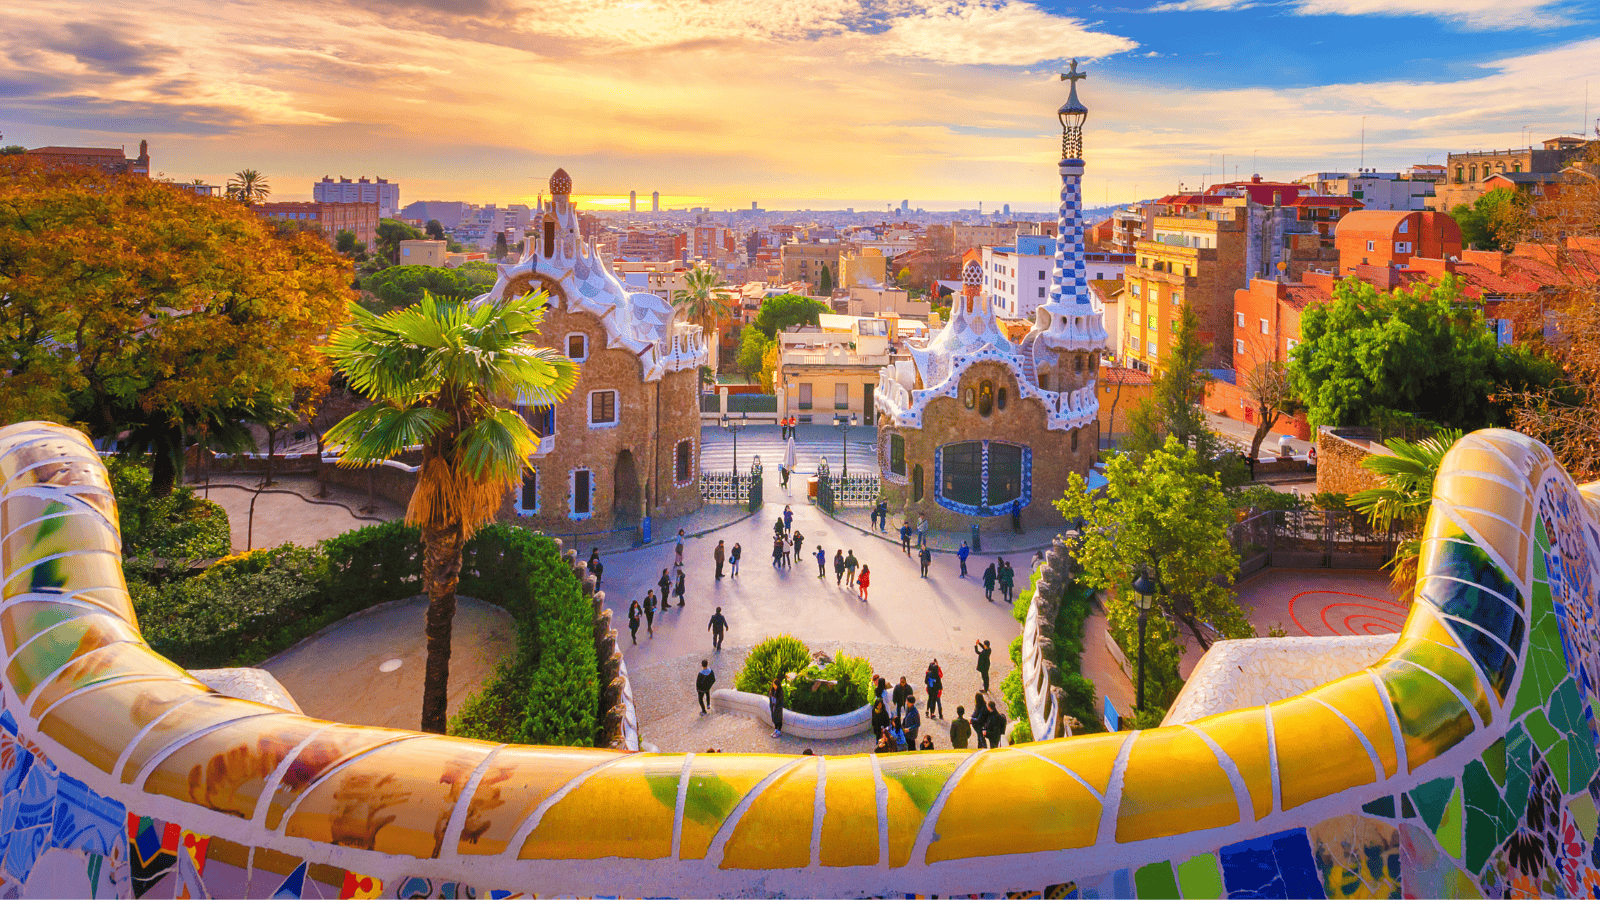 <p>Barcelona can be accessible for travelers with disabilities, though some planning can help. Many hotels and public transportation options try to accommodate individuals with disabilities. Buses and the metro provide options such as ramps and designated spaces for wheelchairs.</p><p>Barcelona’s main attractions, like the Sagrada Família, Park Güell, and Casa Batlló, have accessible entrances and facilities. Additionally, many museums and cultural sites offer facilities for those with mobility issues. </p>